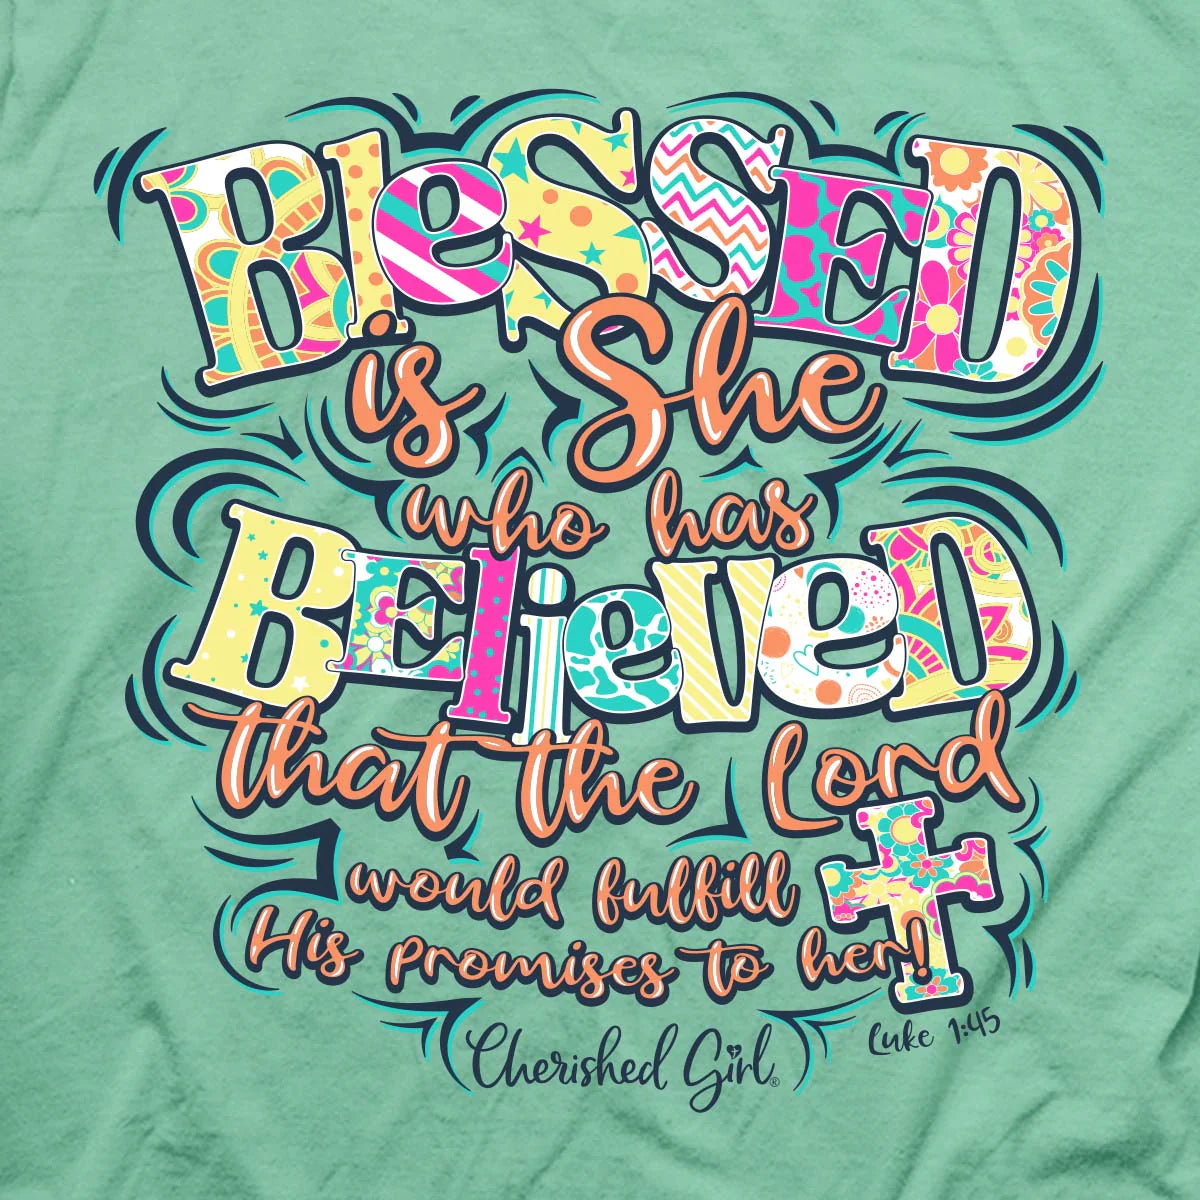 Cherished Girl Womens T-Shirt Blessed Is She Cherished Girl® Apparel Short Sleeve T-shirts Women's